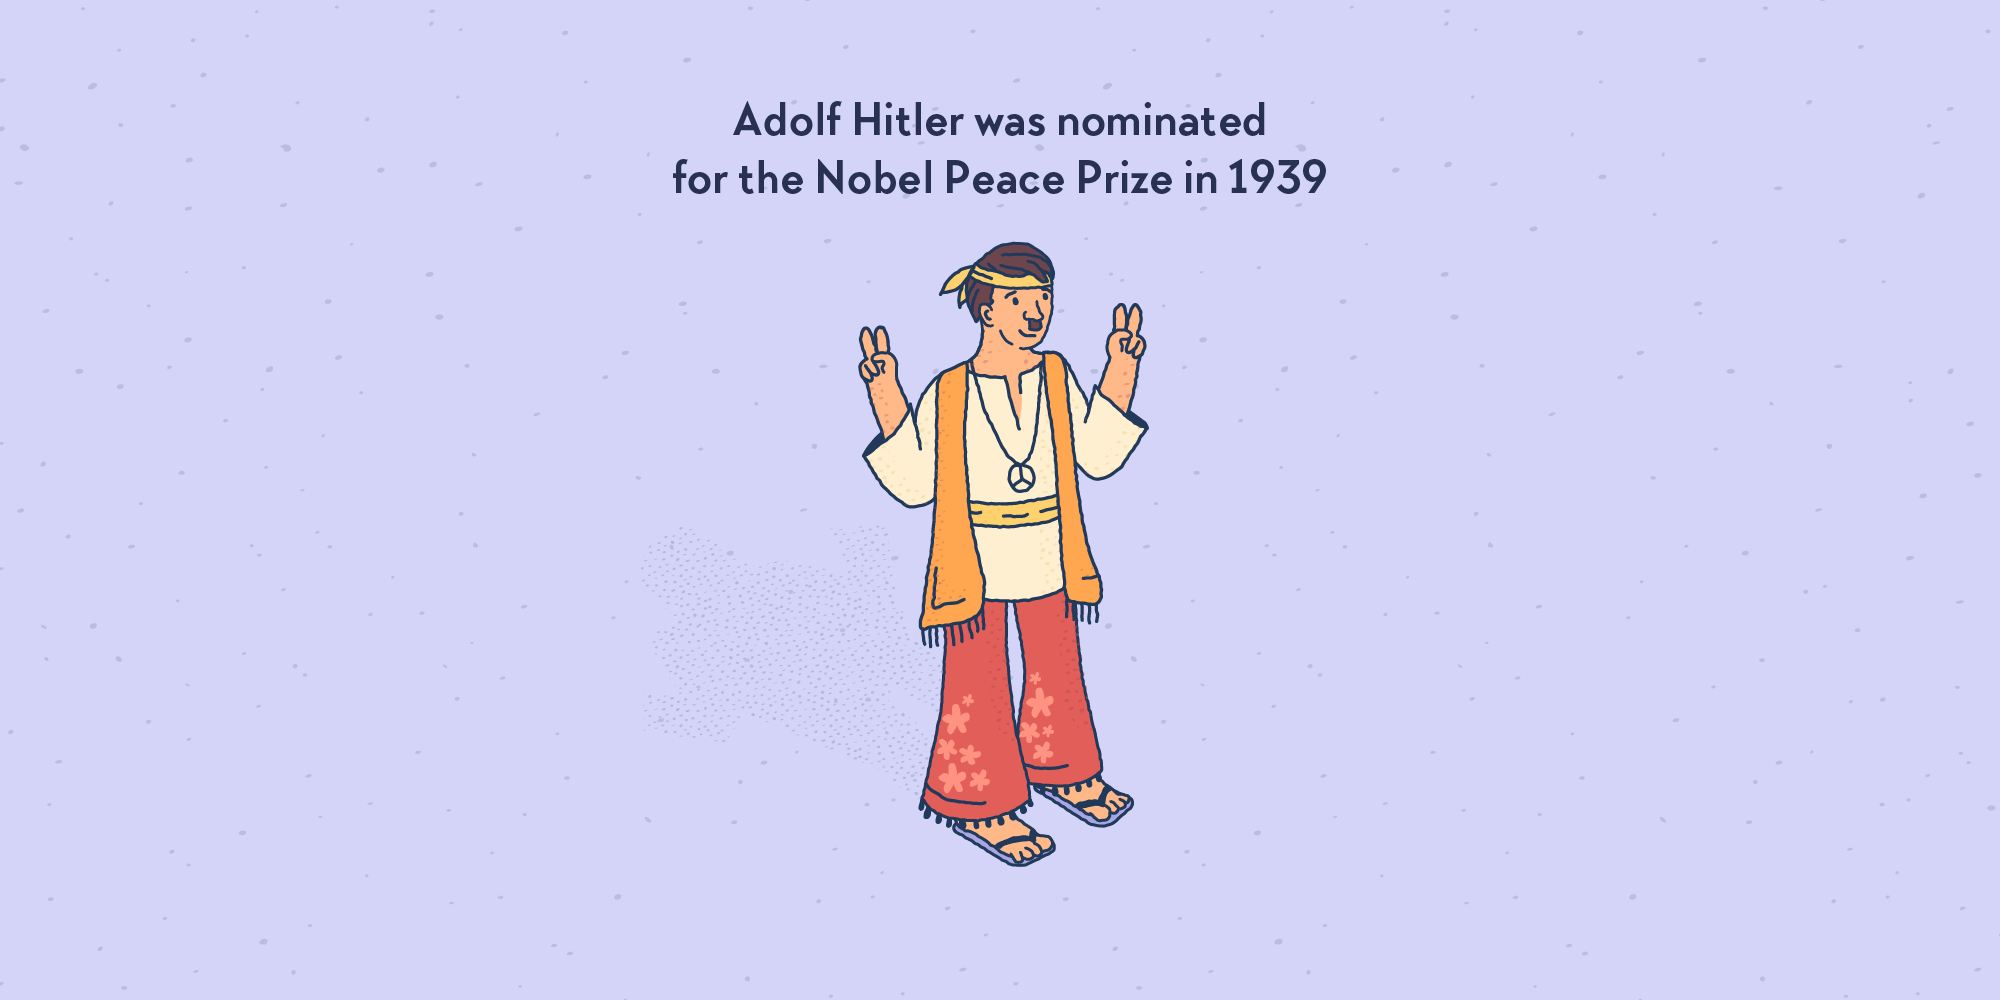 Adolf Hitler, recognisable by its moustache, dressed as a seventies‘ hippie, doing the peace sign and wearing a peace symbol.